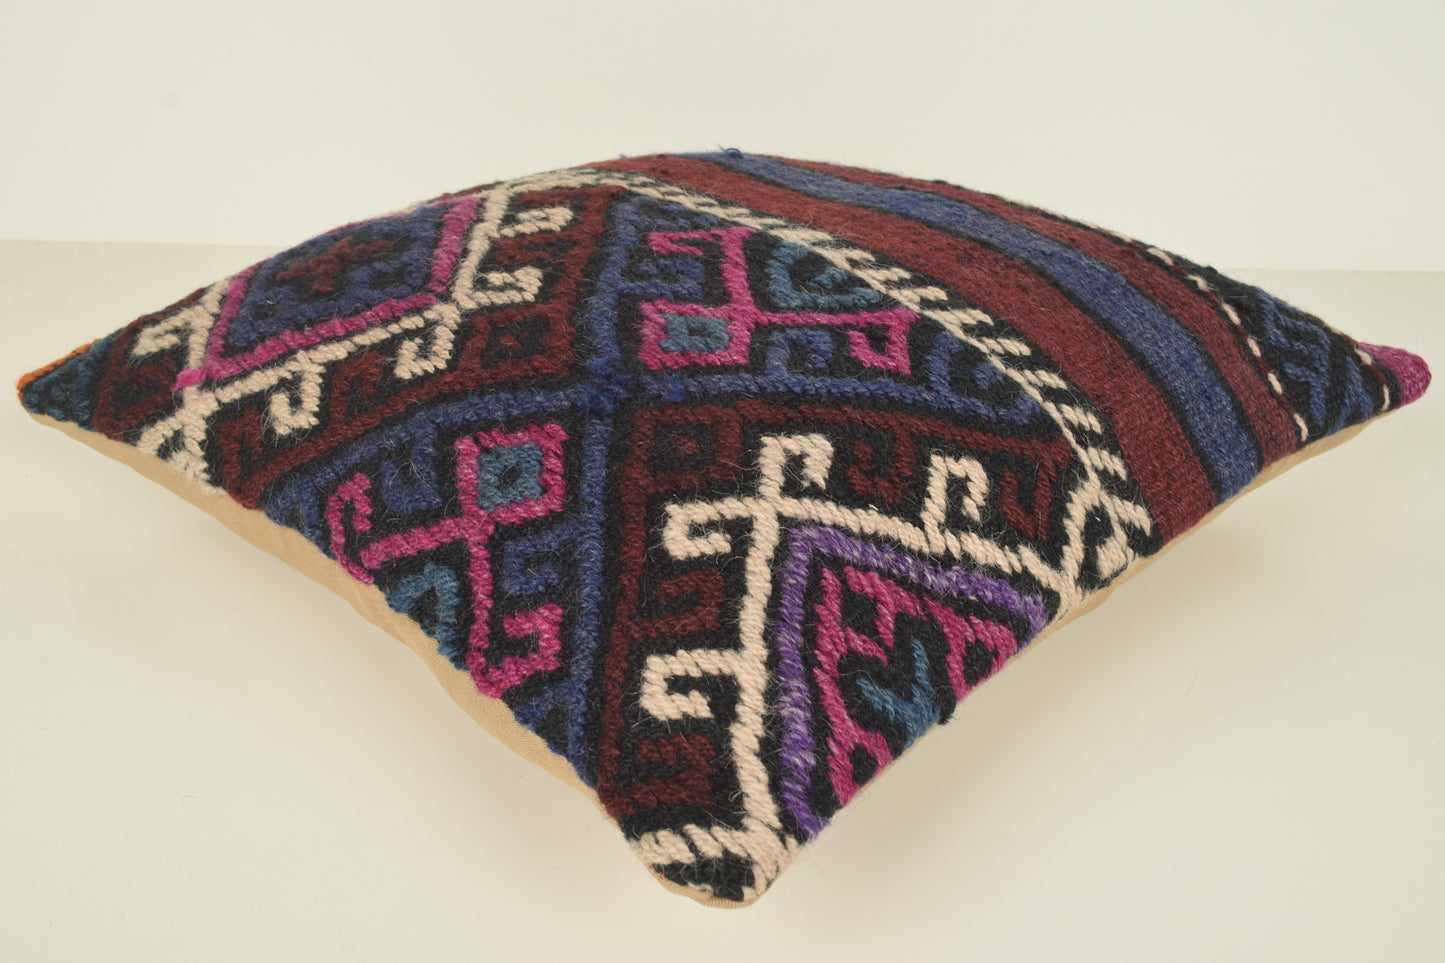 Blue Red Pink Crate and Barrel Kilim Rug Pillow C00830 18x18 " - 45x45 cm.